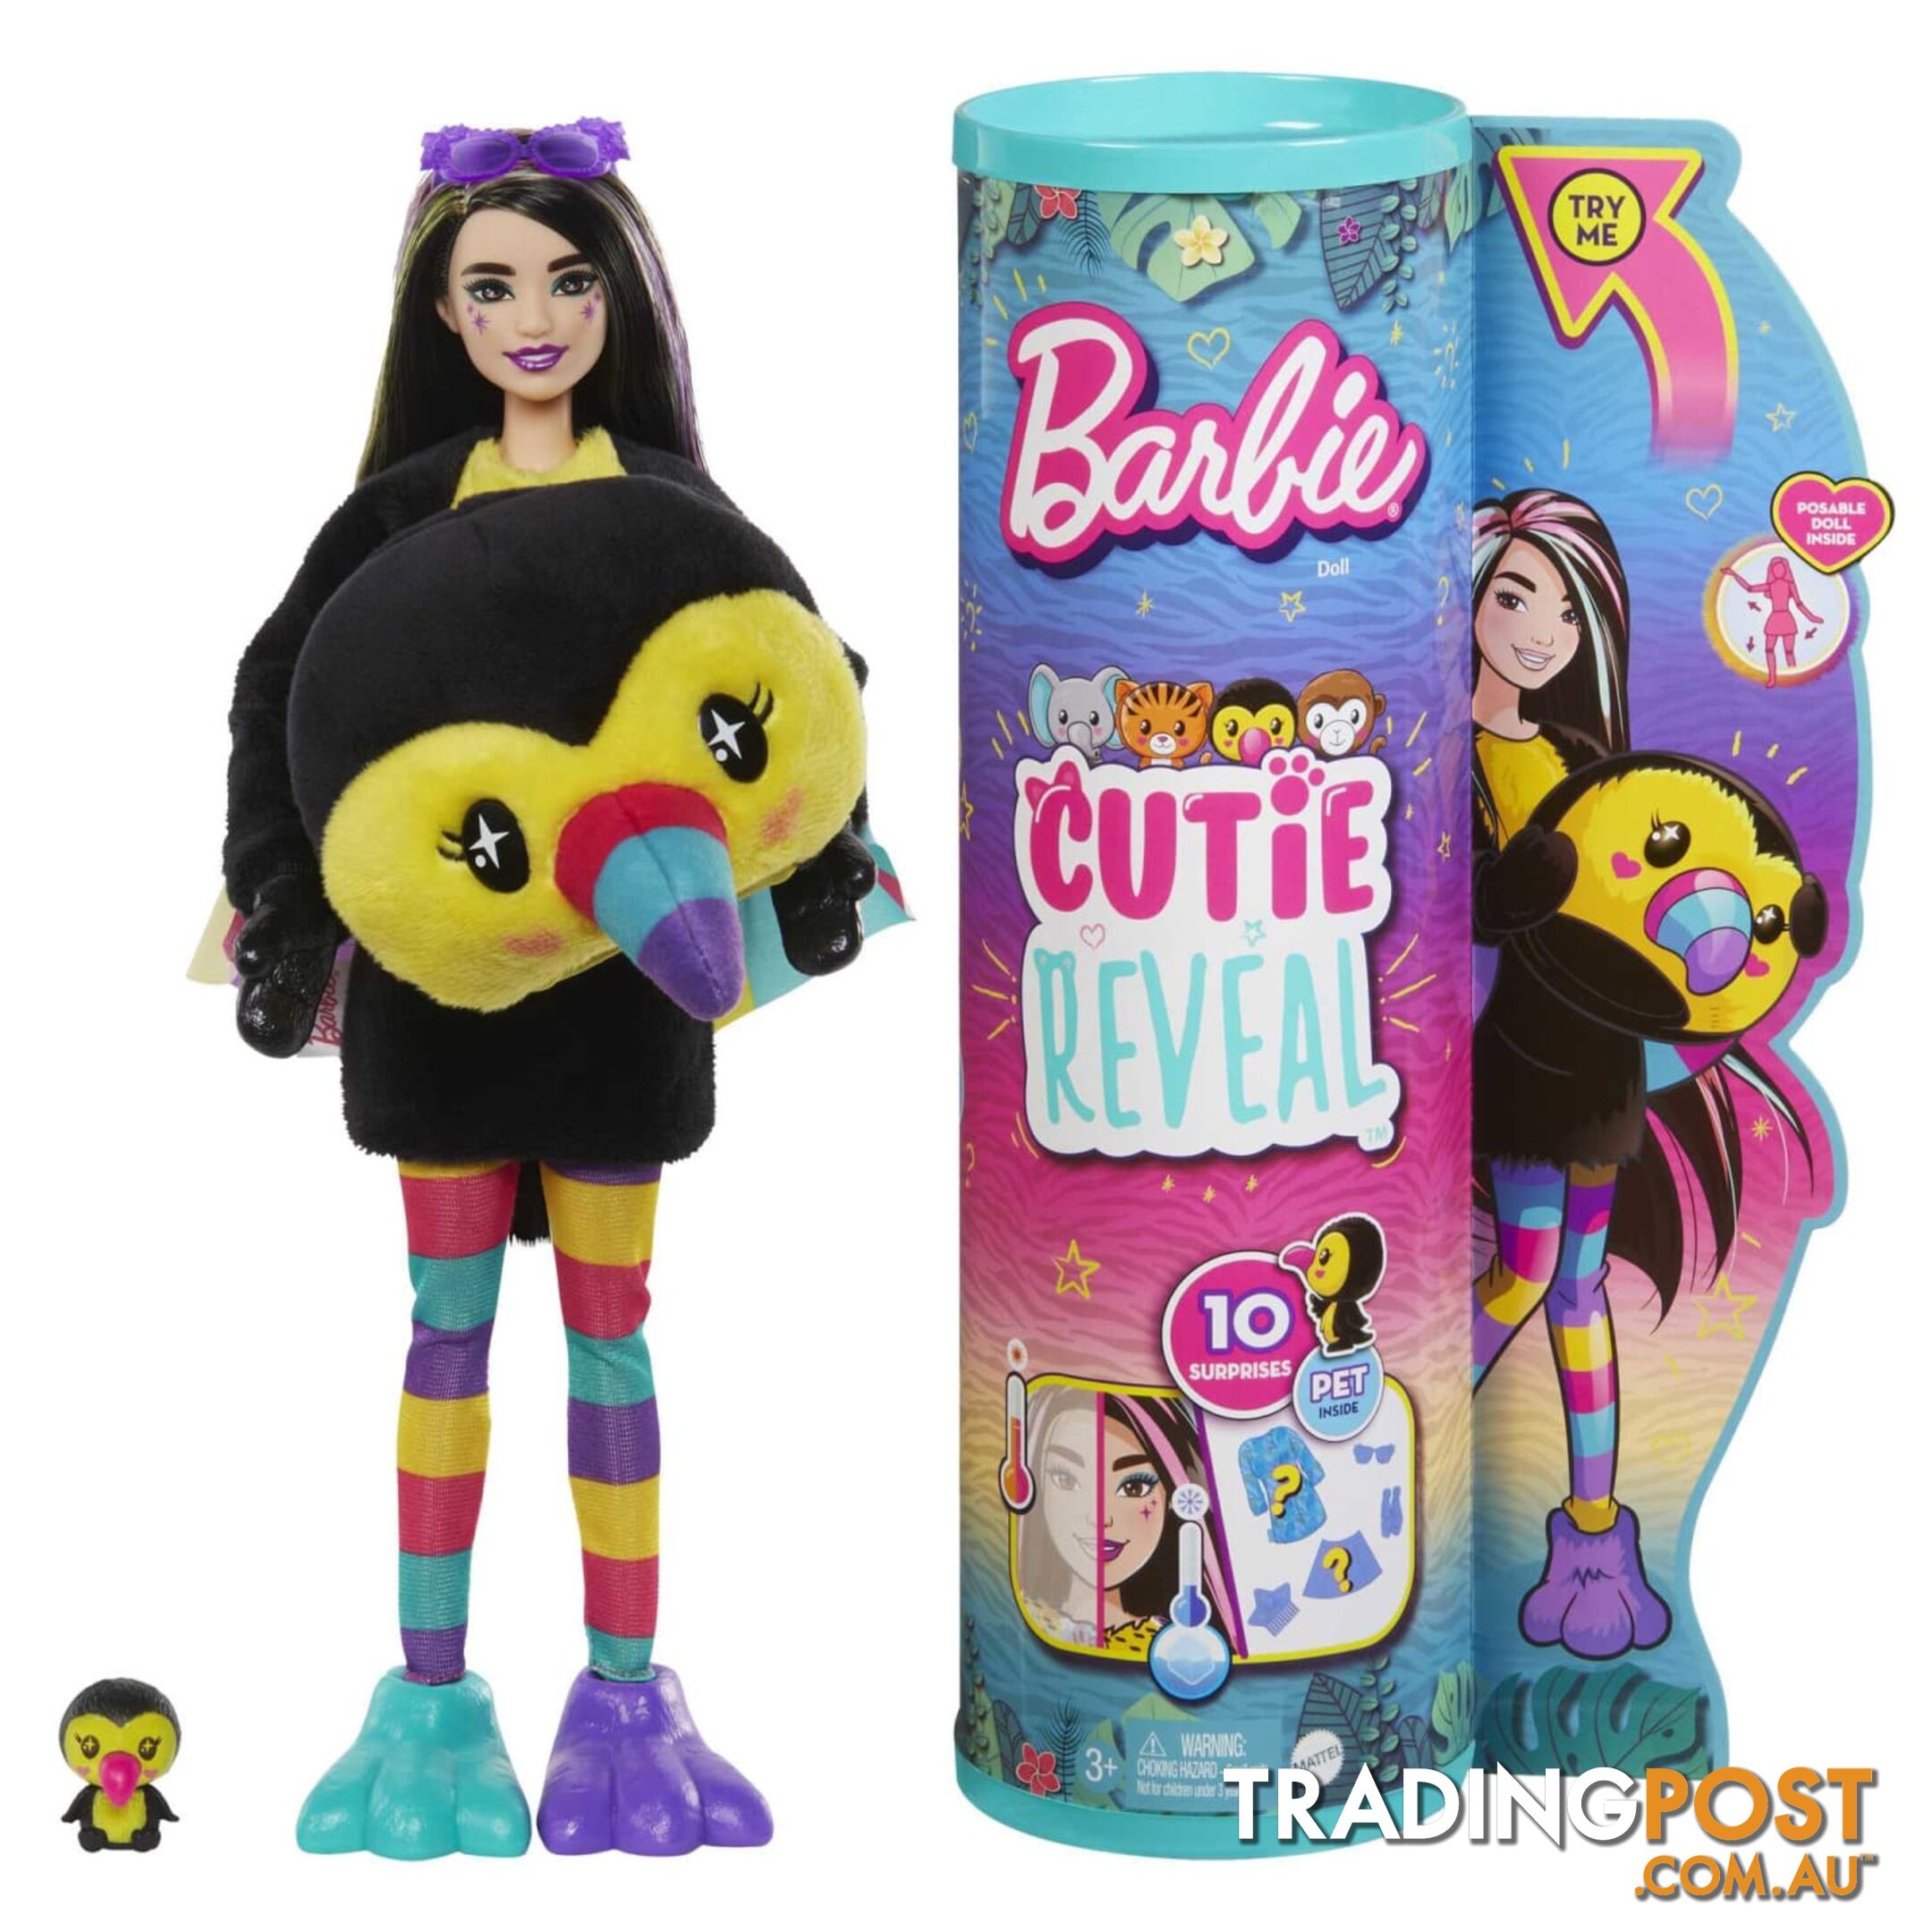 Barbie Cutie Reveal Doll And Accessories Jungle Series Toucan-themed Small Doll Set - Mahkr00 - 194735106967